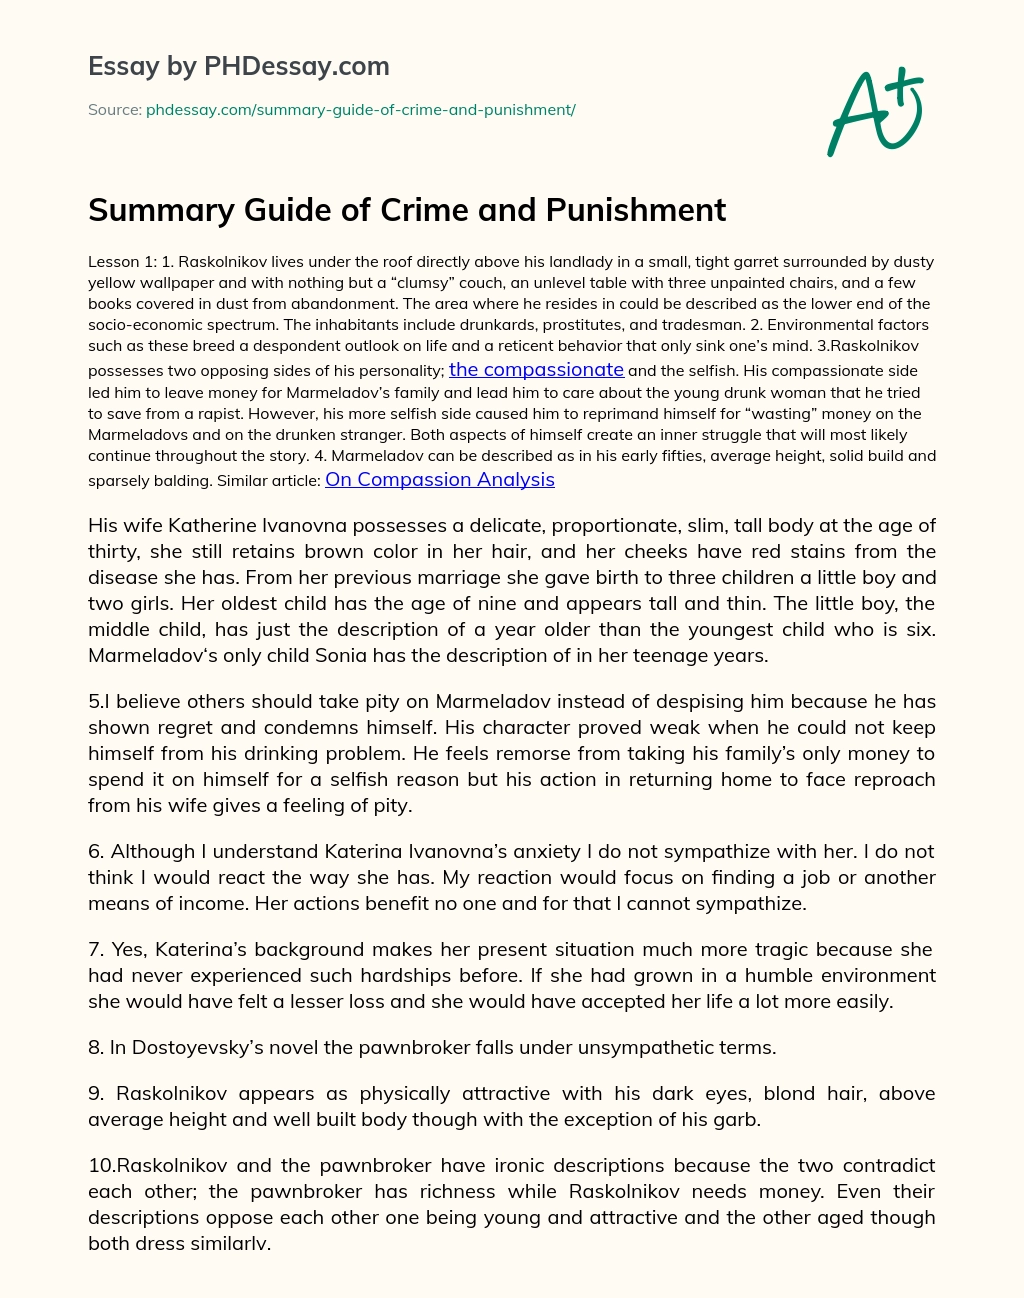 Summary Guide of Crime and Punishment essay